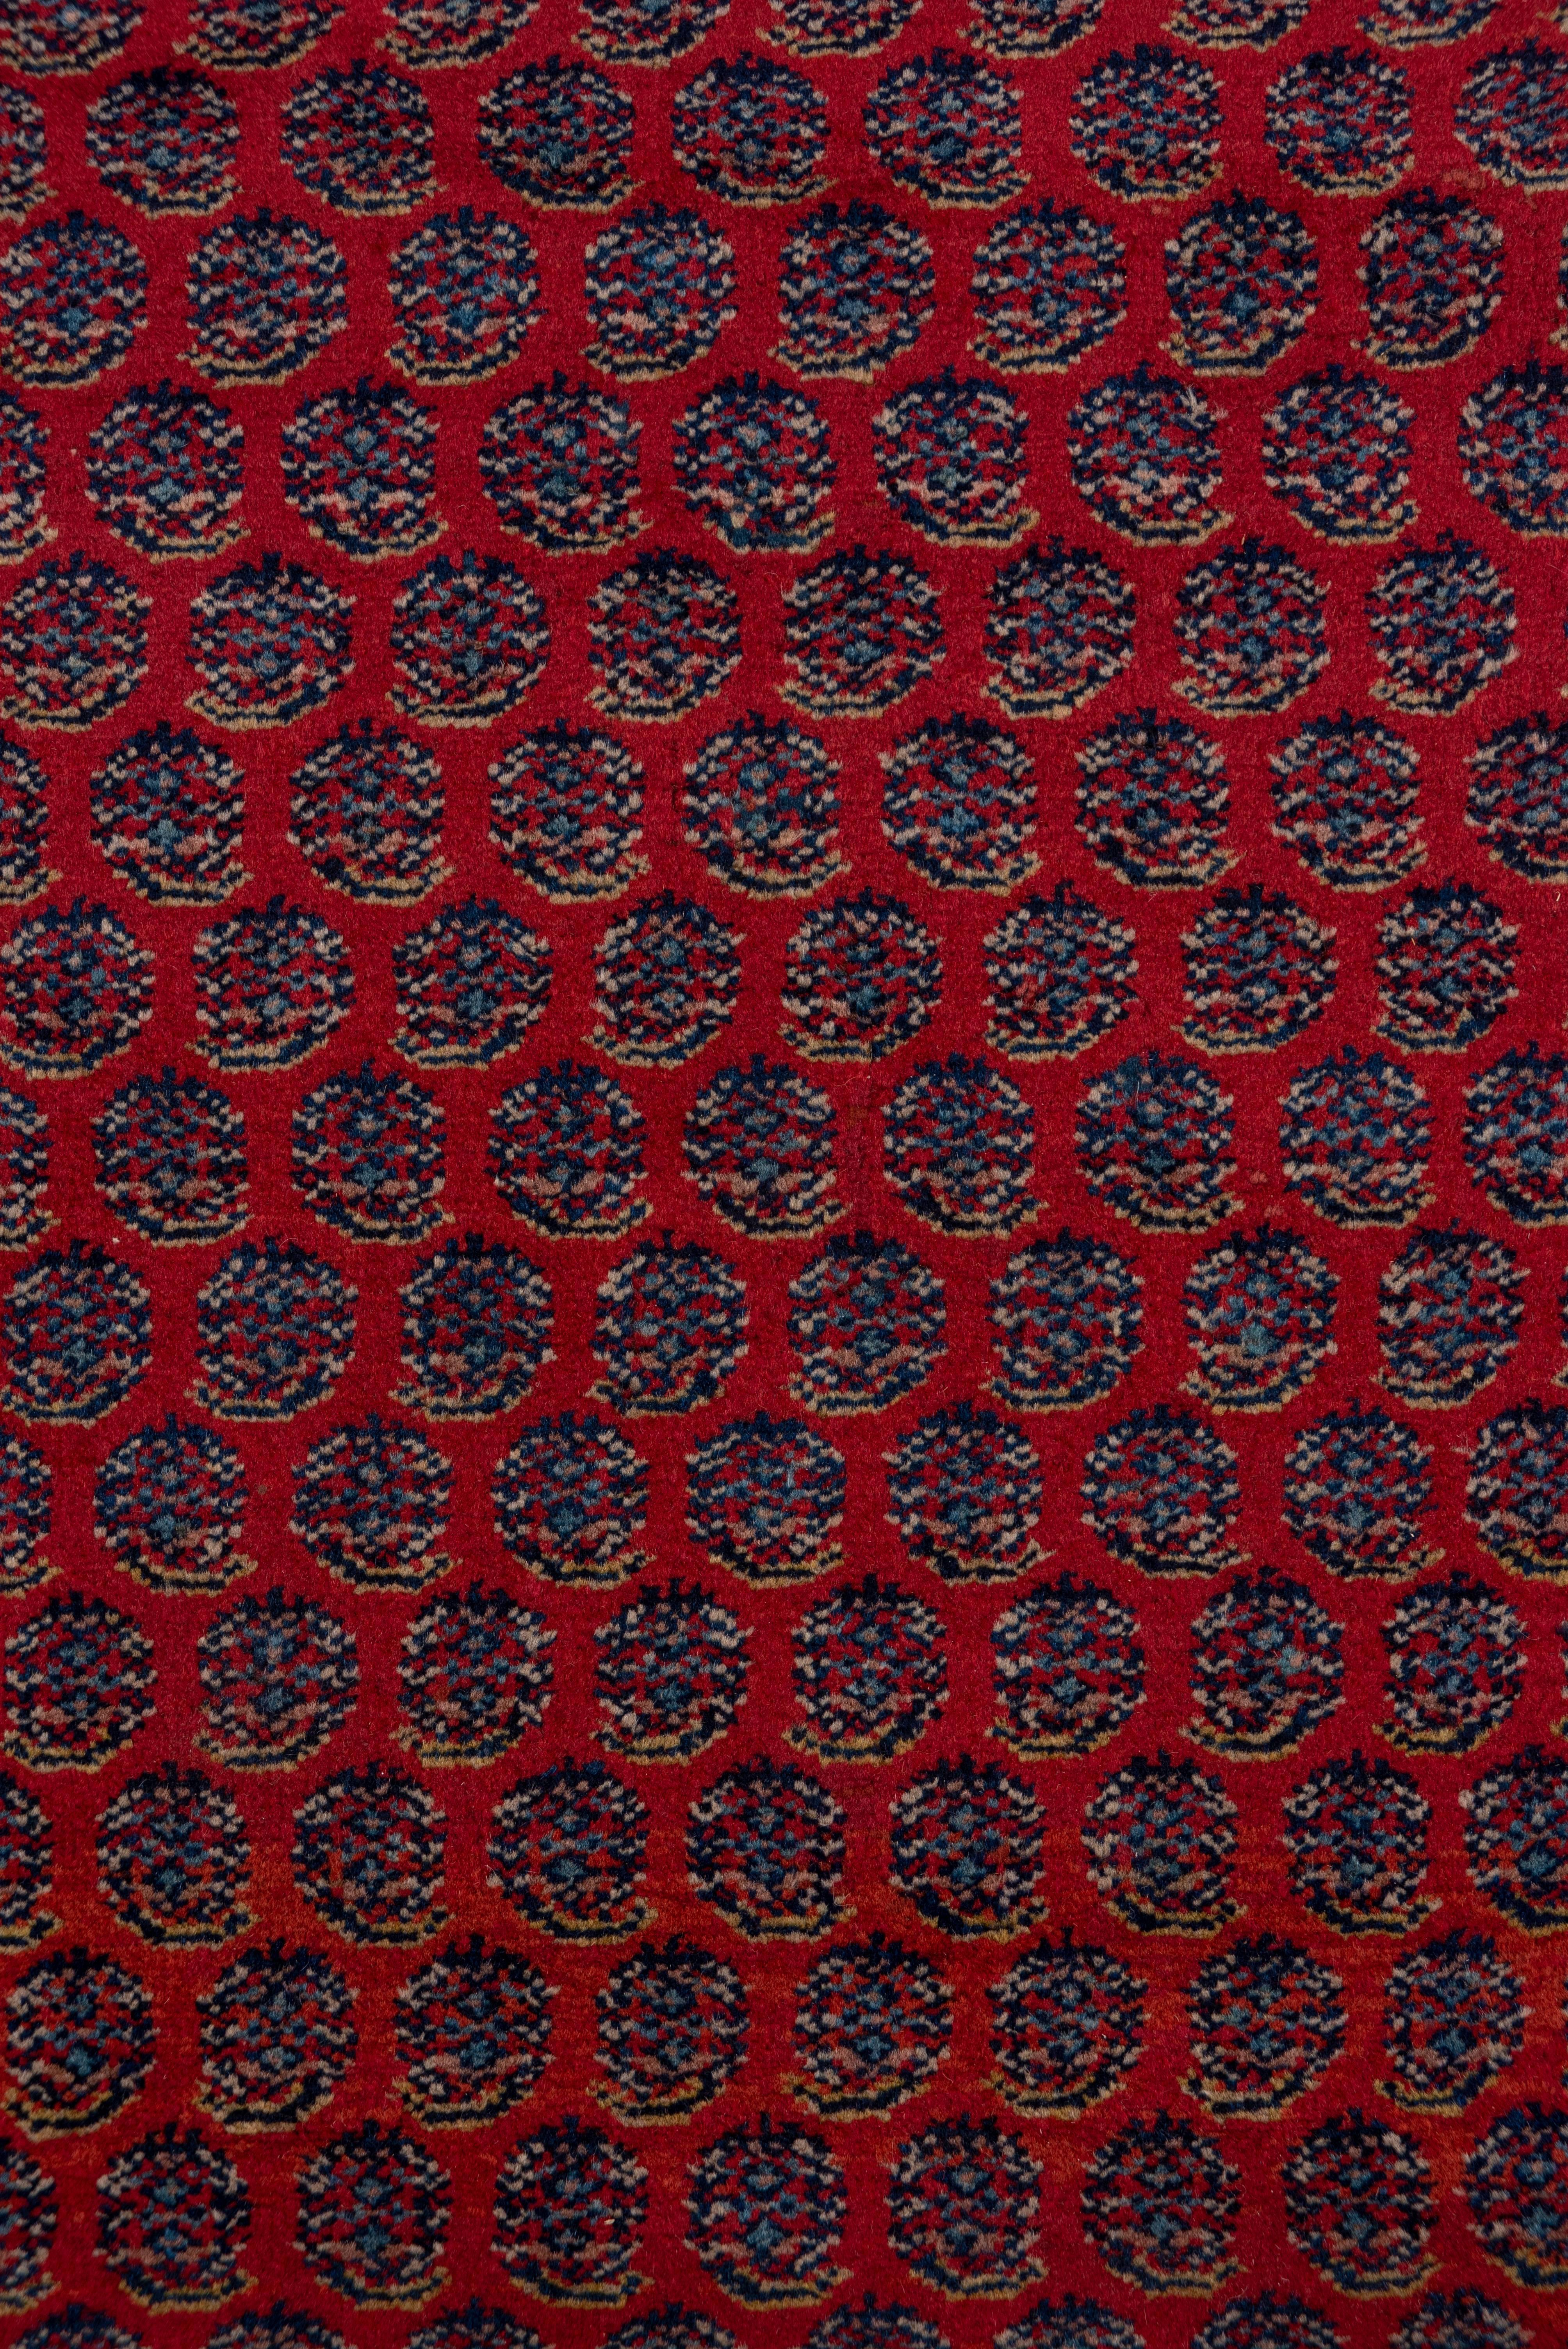 20th Century Antique Persian Saraband Carpet, Red Allover Field, Circa 1930s For Sale